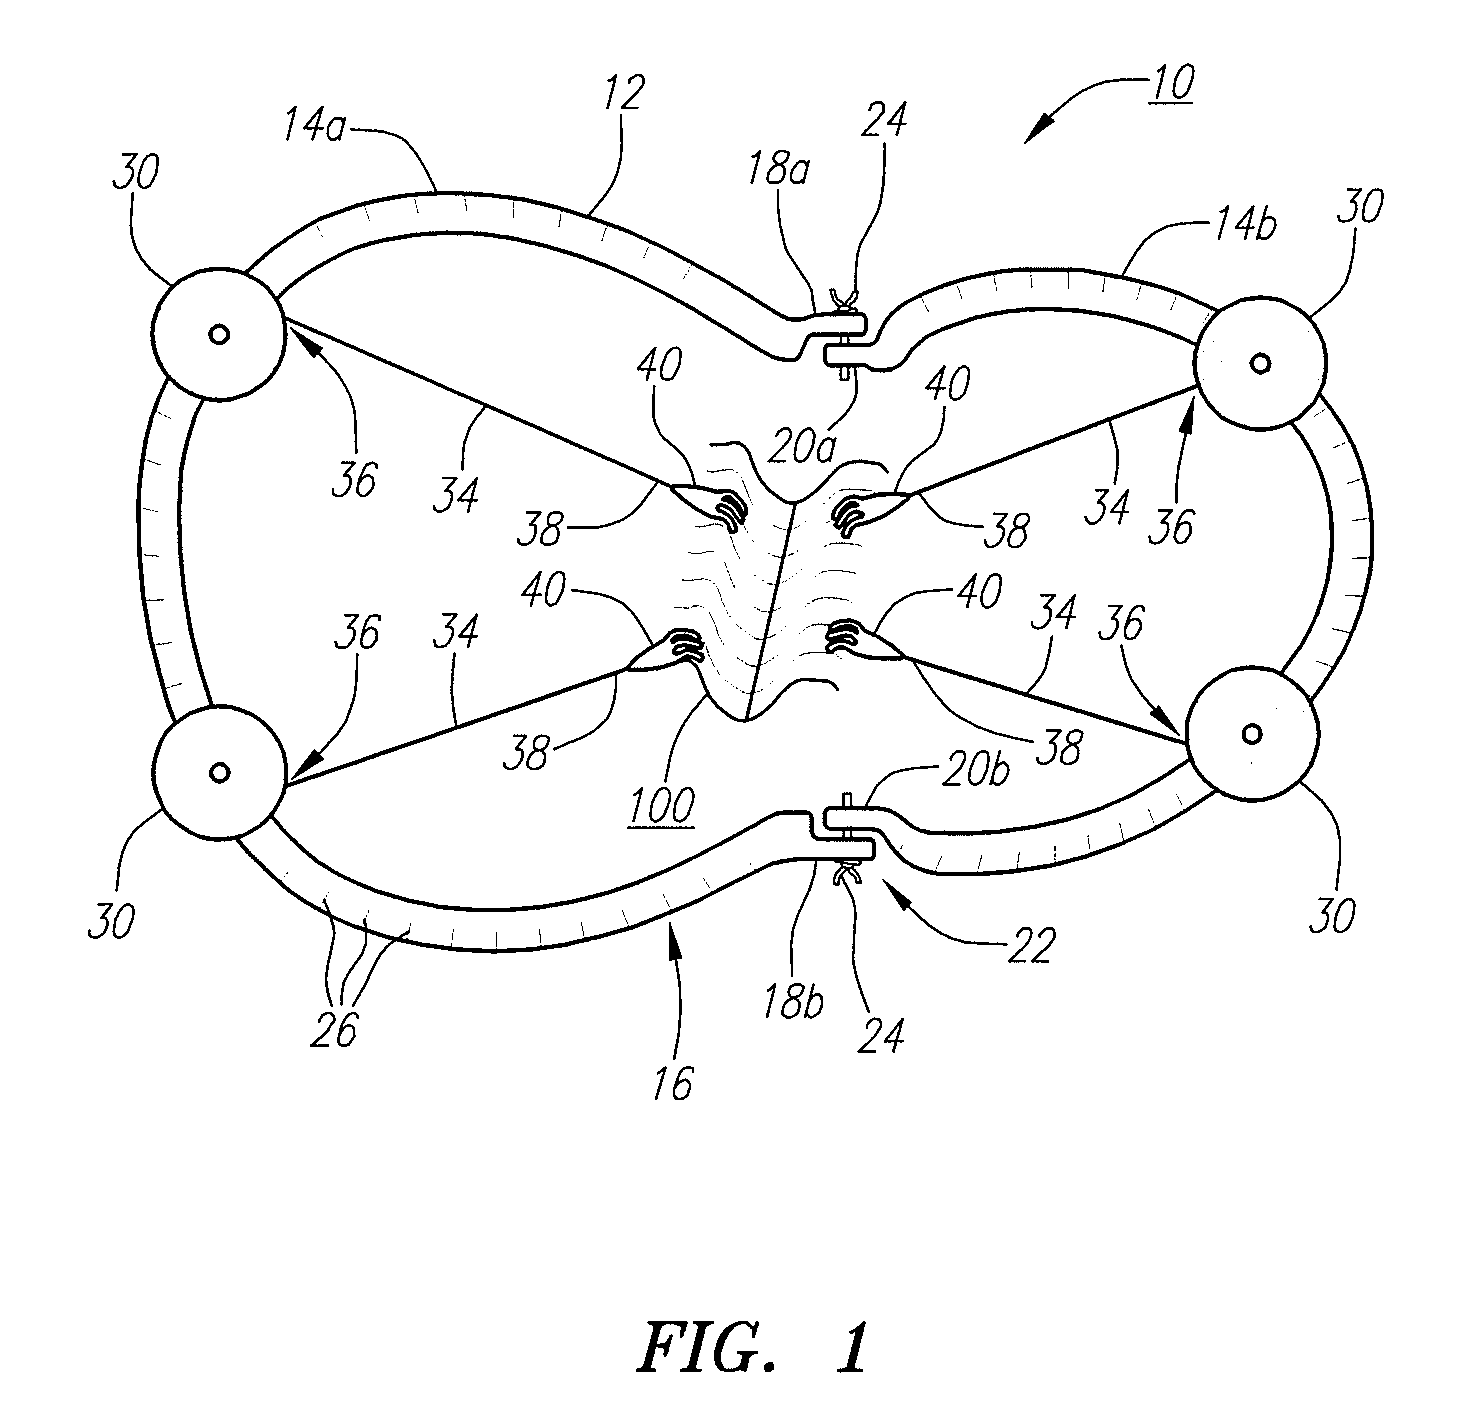 Surgical retractor device and method of use